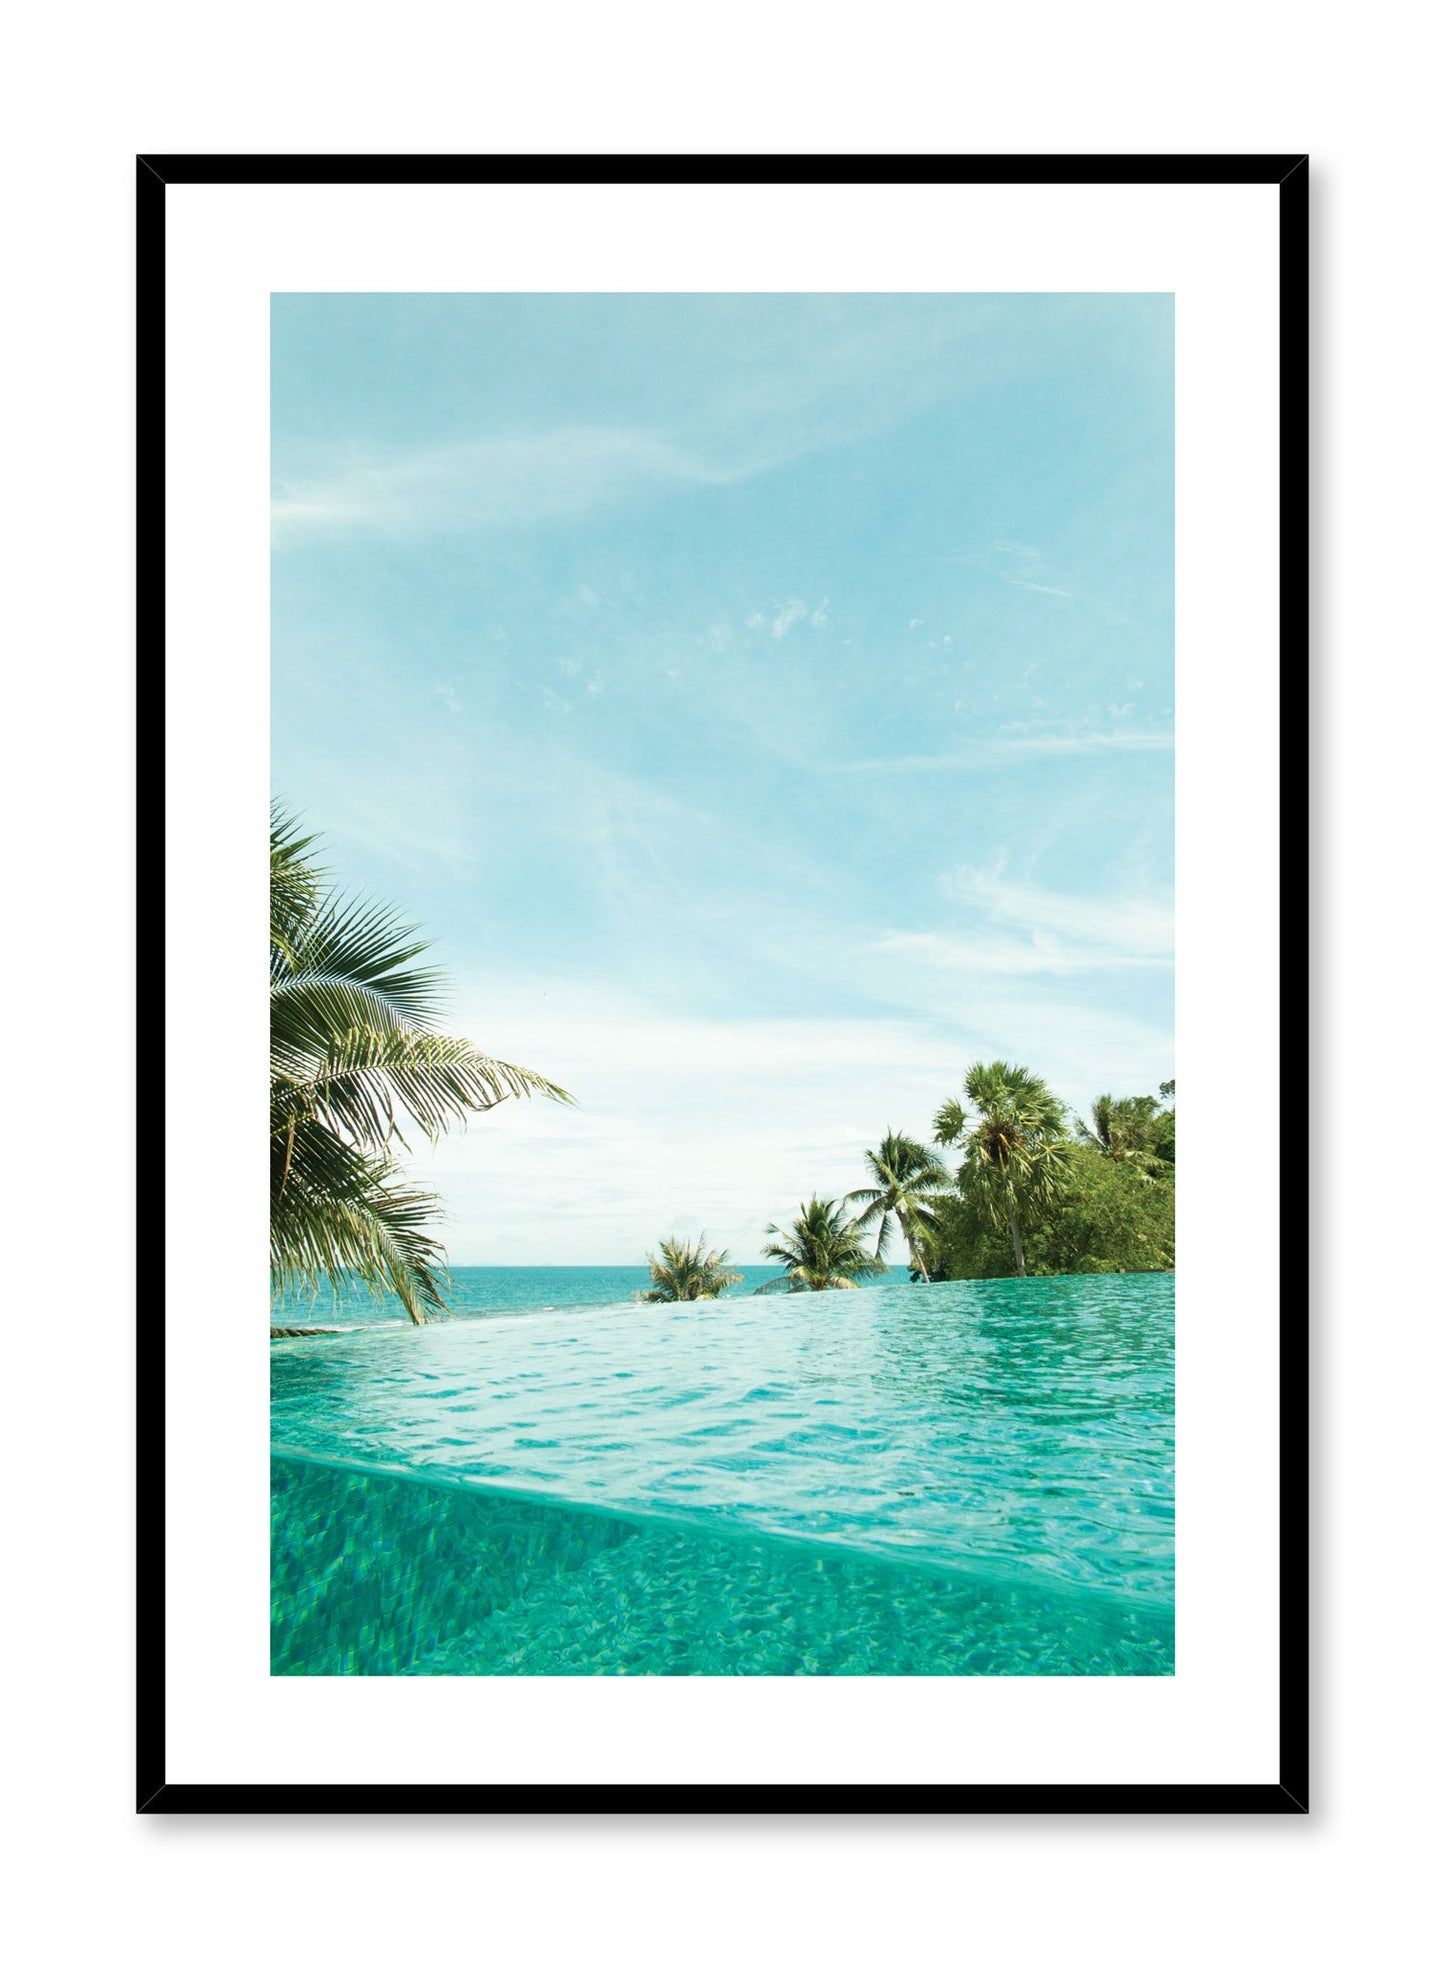 Minimalist design poster by Opposite Wall with photography of palm tree beside pool